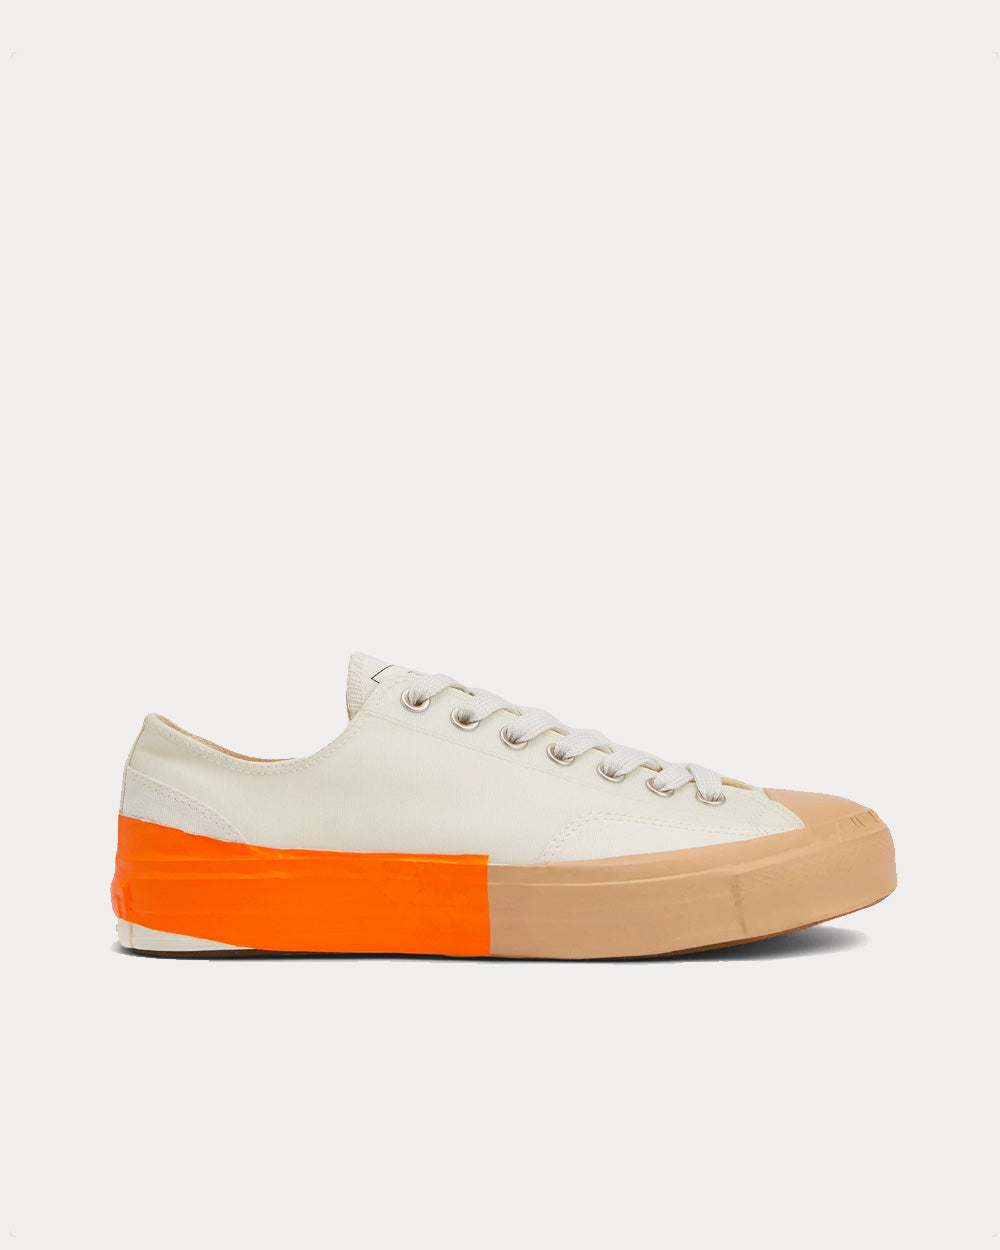 MSGM - Tape Appliqued Vulcanized Canvas White / Orange Low Top Sneakers